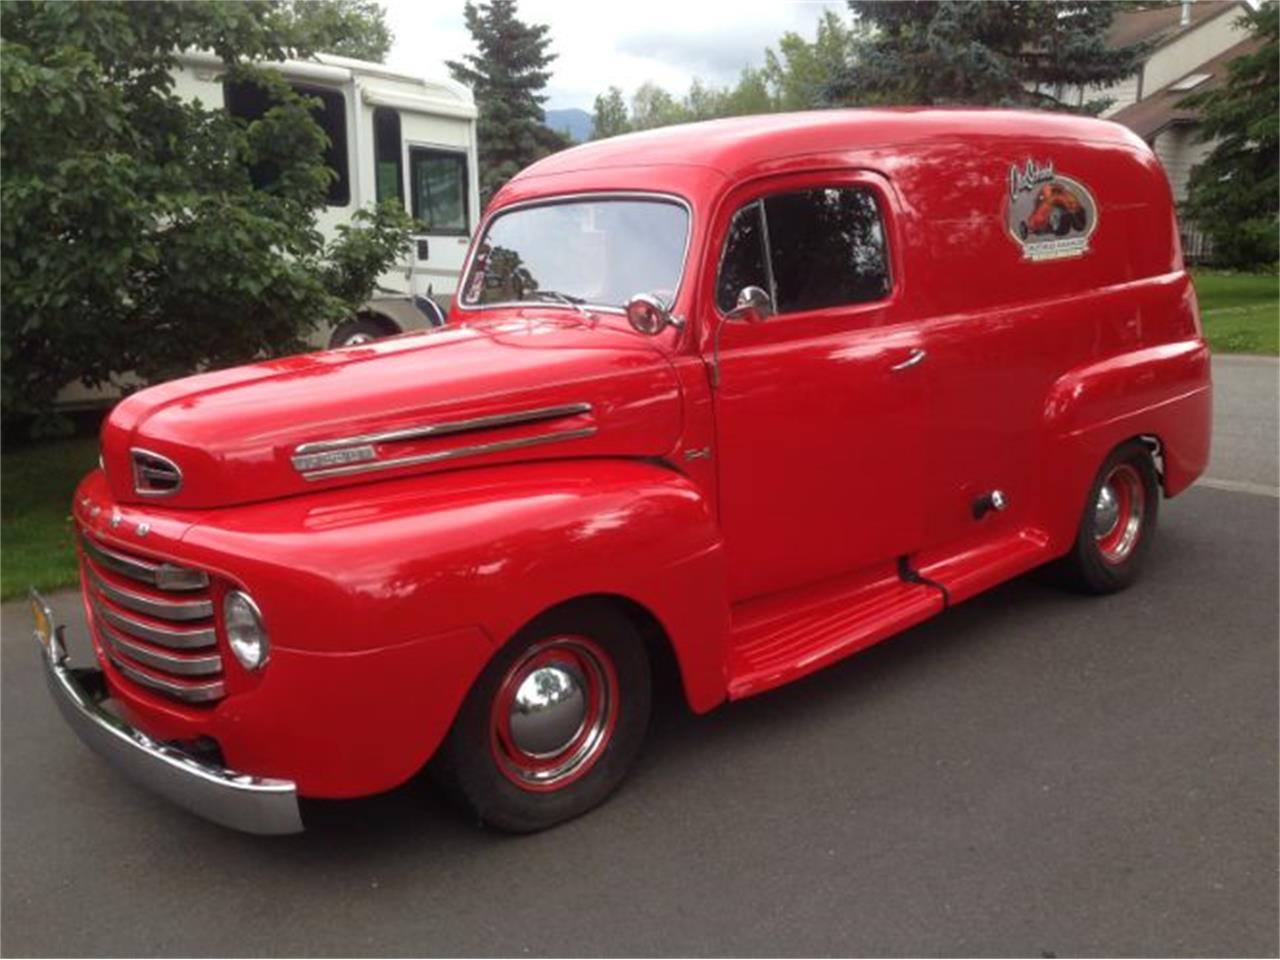 1949 Ford Panel Truck For Sale Classiccarscom Cc 1126874